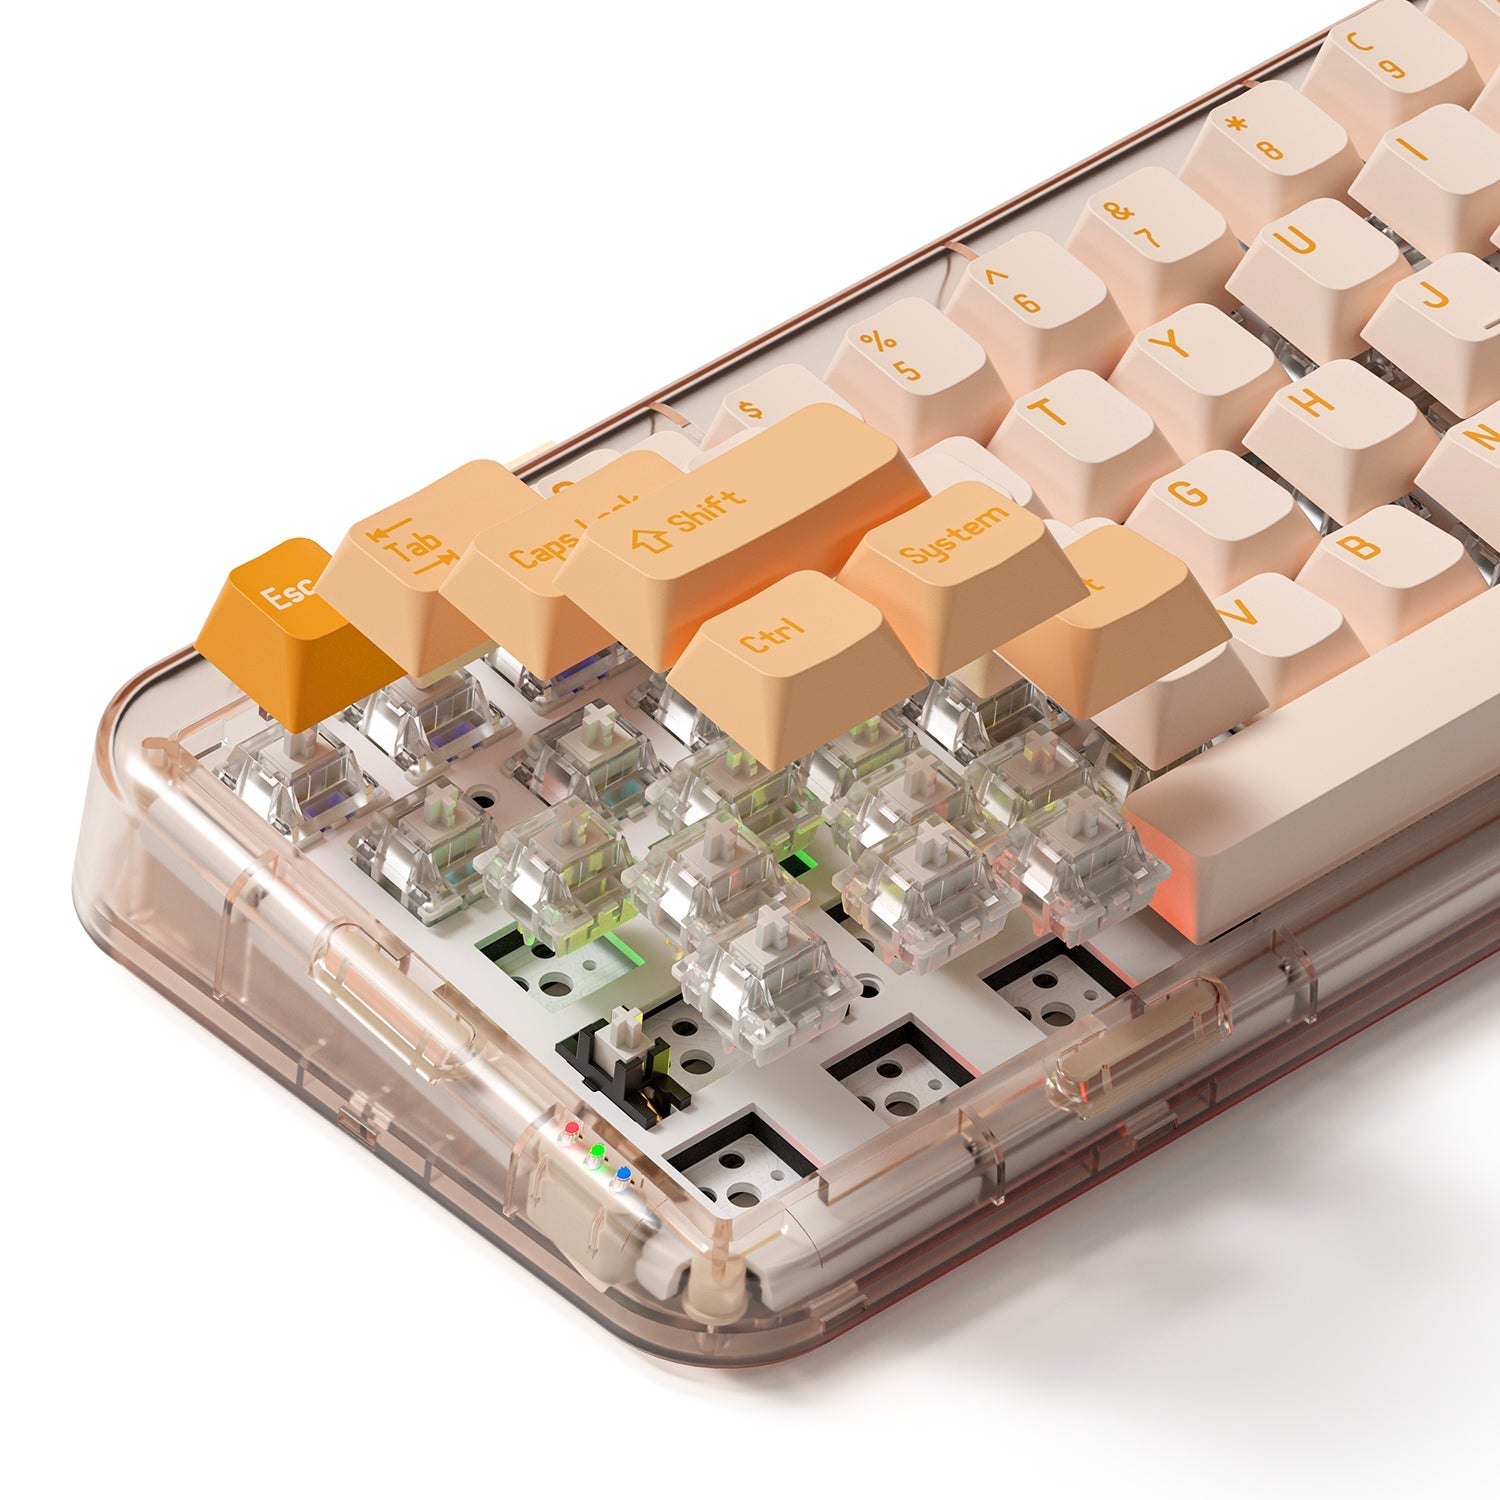 What's Hot in Hardware Part 1: Rose Gold